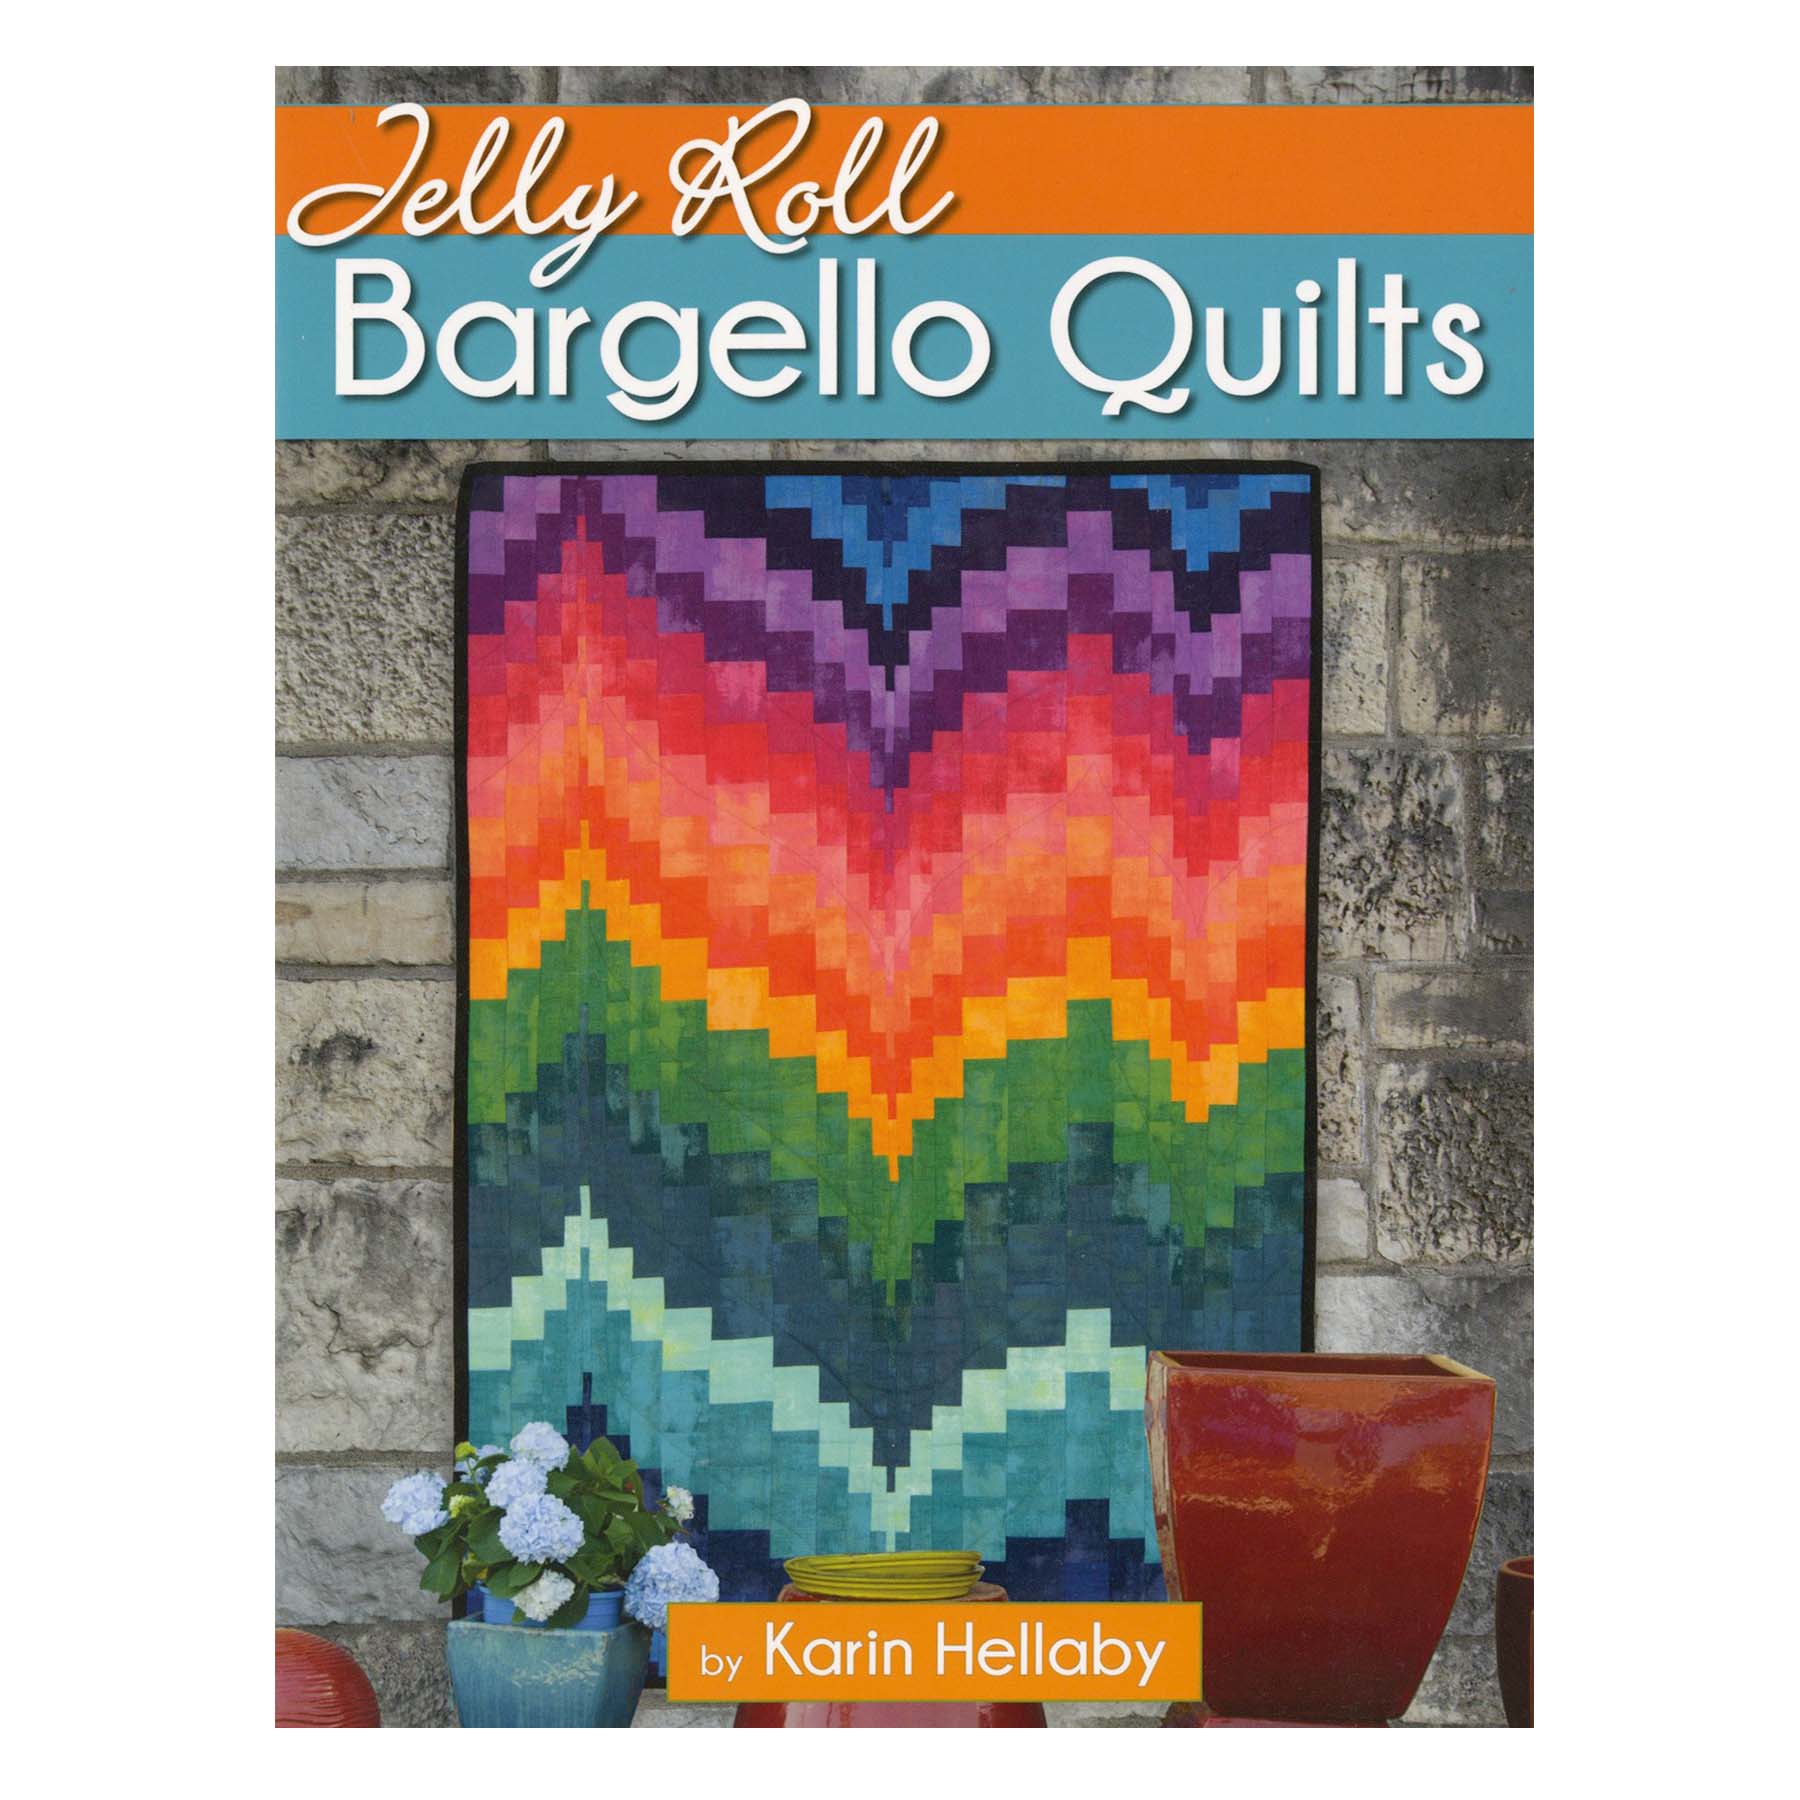 Jelly Roll Bargello Quilts Book by Karin Hellaby